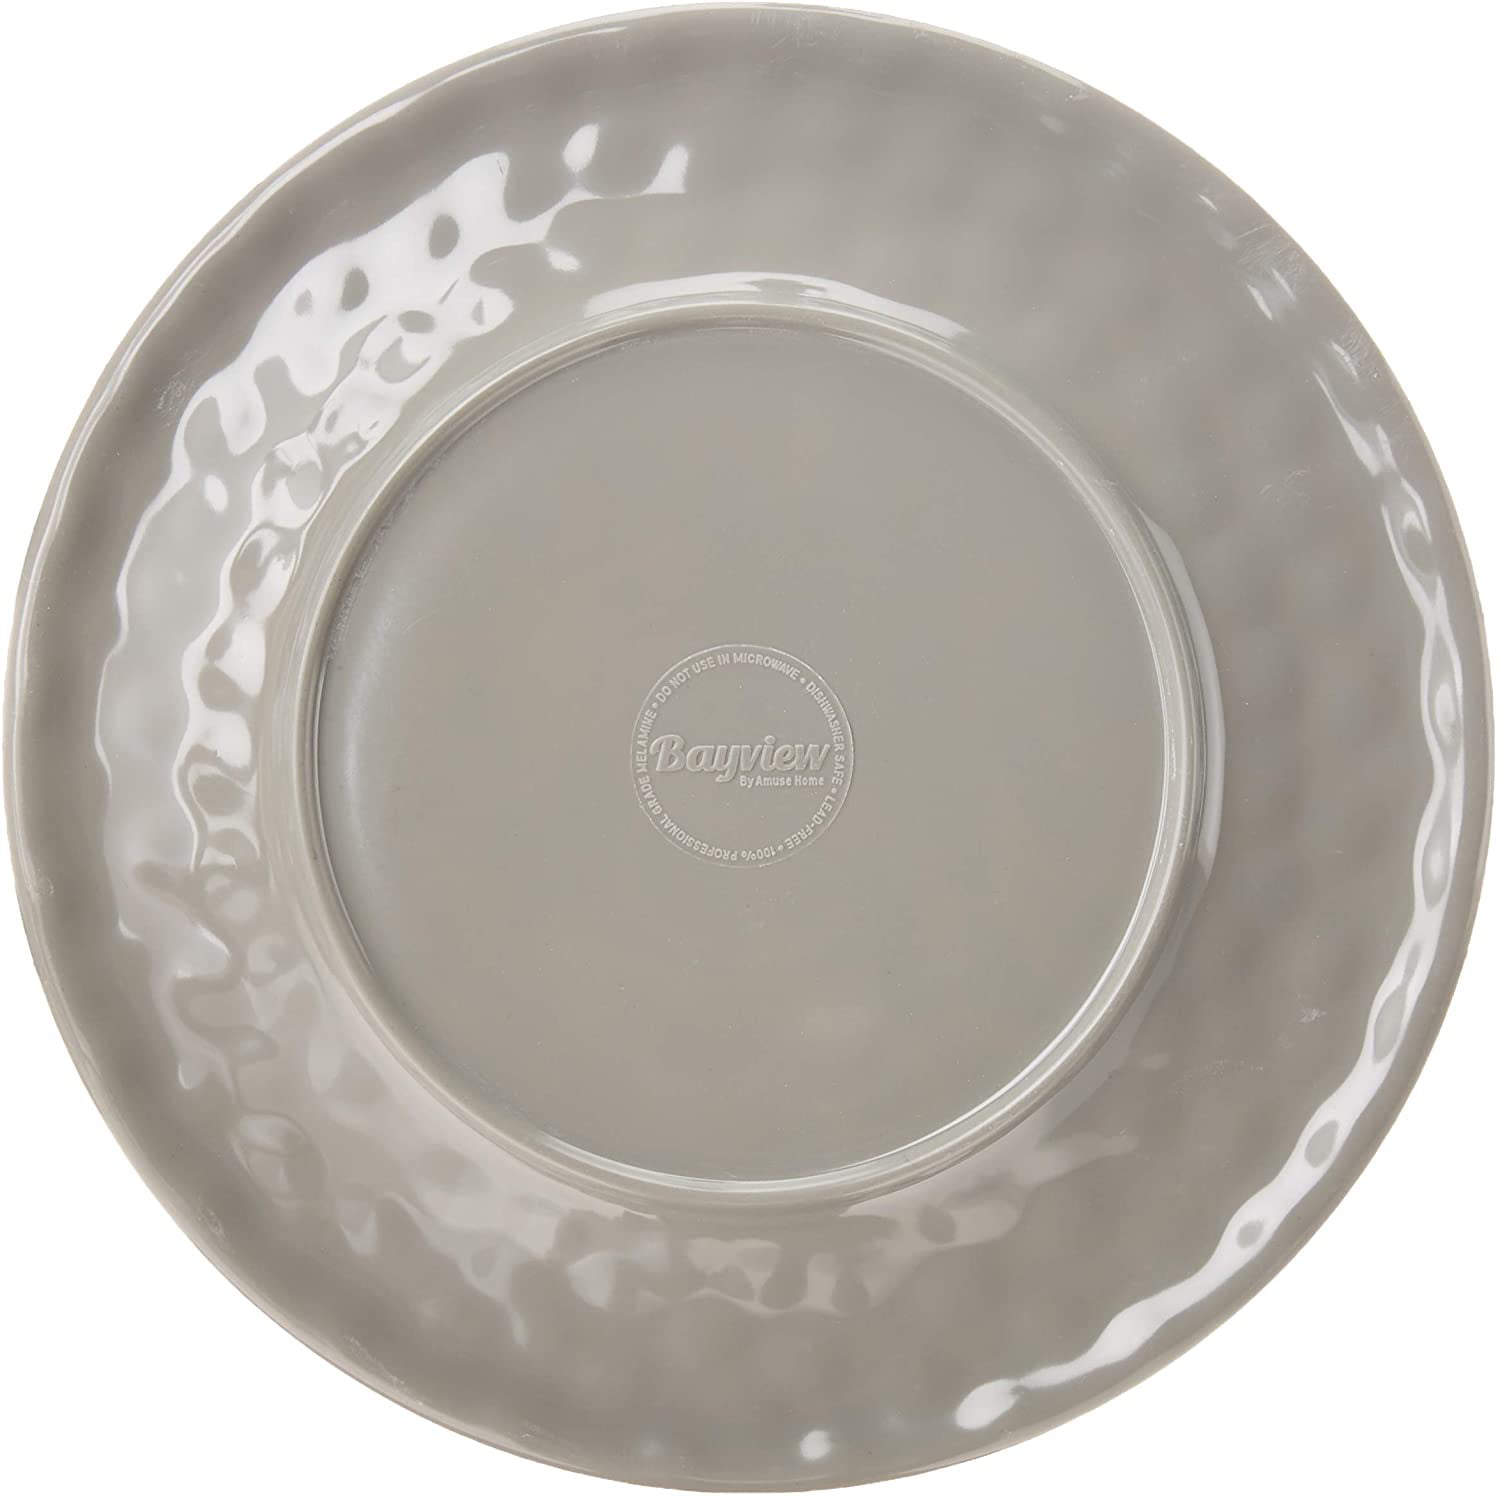 Unbreakable Melamine Daily Plates Bayview Essentials Dinner Plate, Gray Set of 6